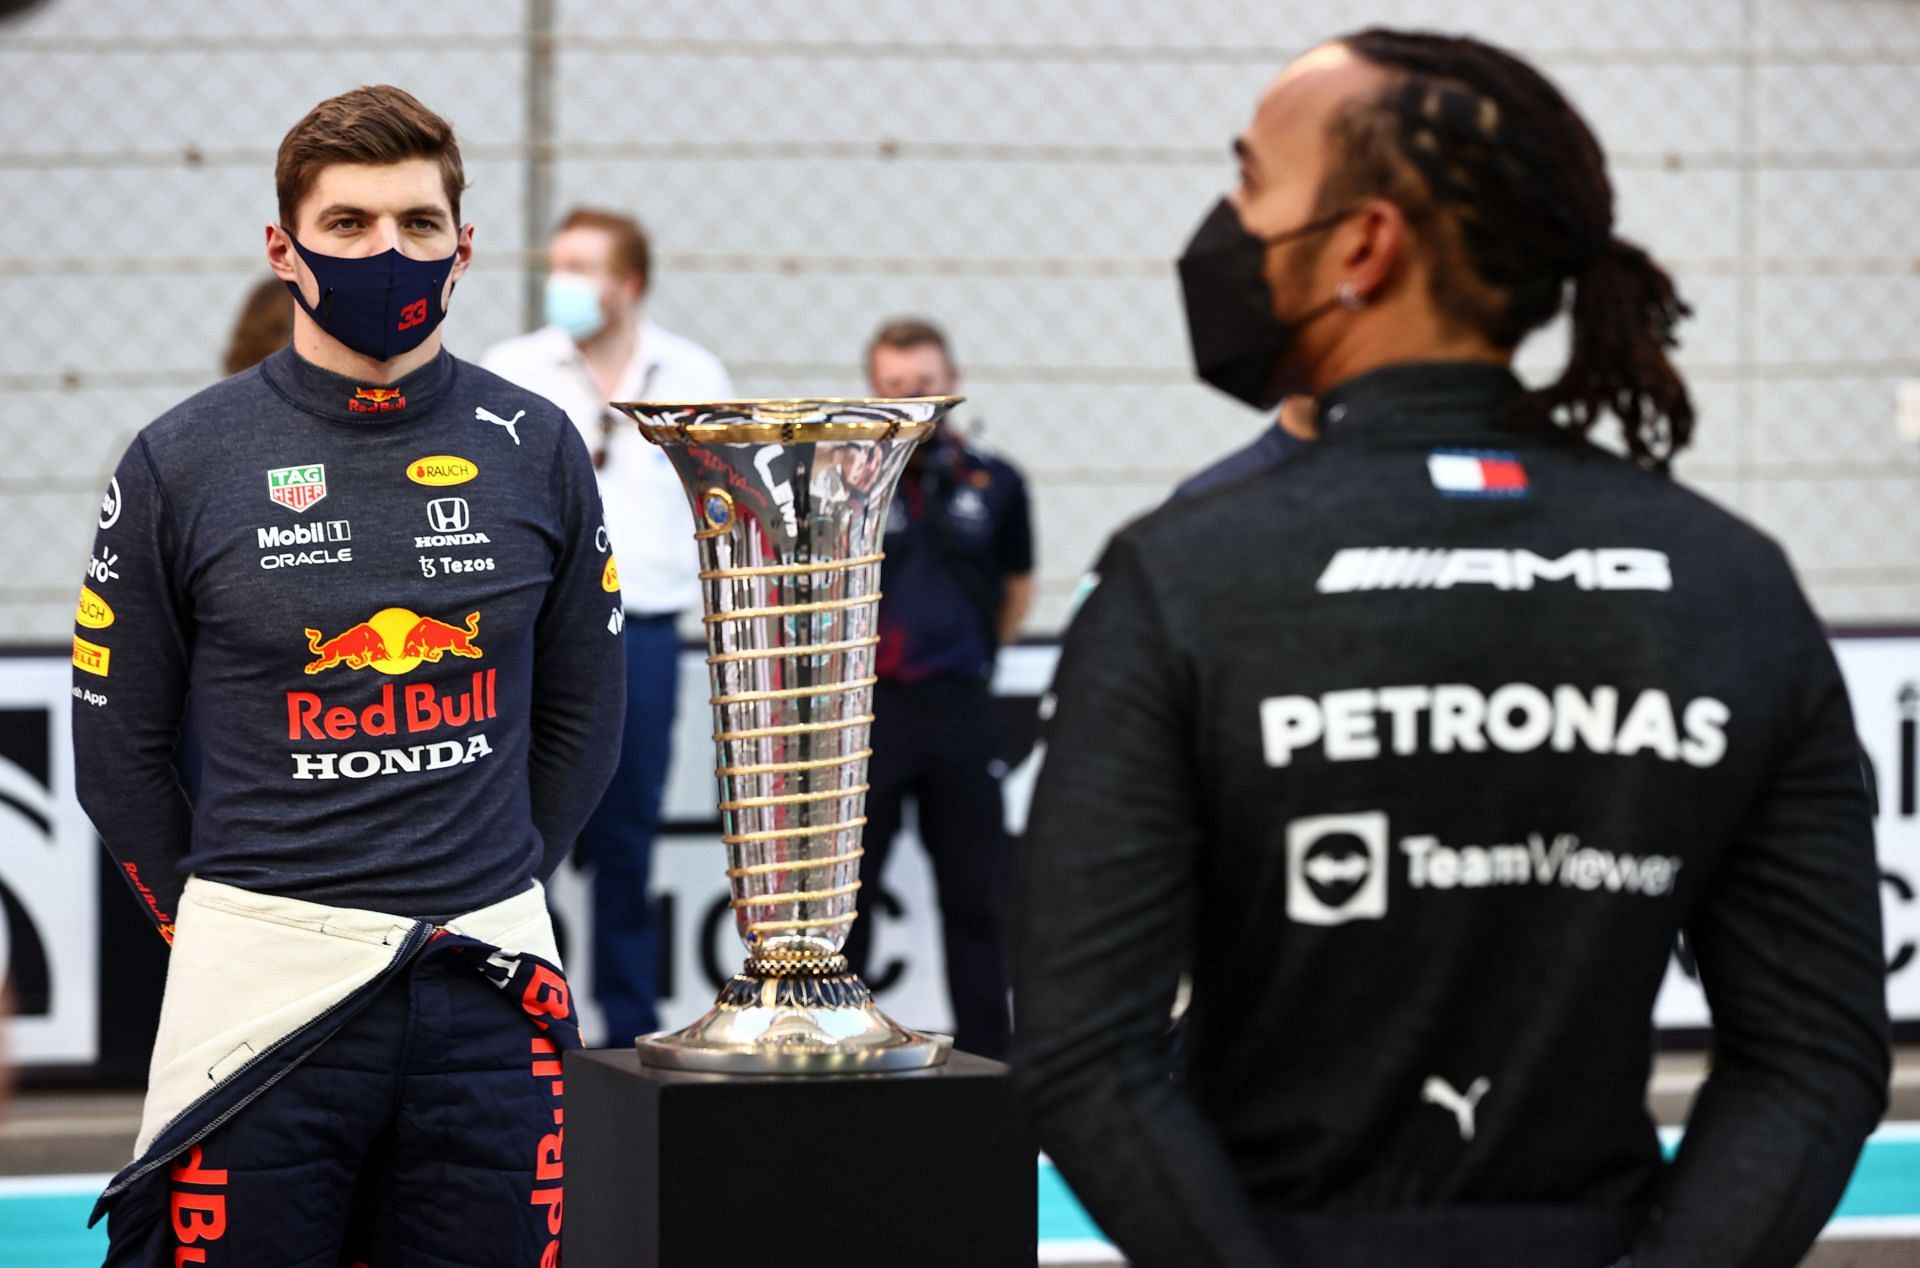 Championship contenders Max Verstappen and Lewis Hamilton on the grid of the seaosn finale in Abu Dhabi. (Photo by Kamran Jebreili - Pool/Getty Images)